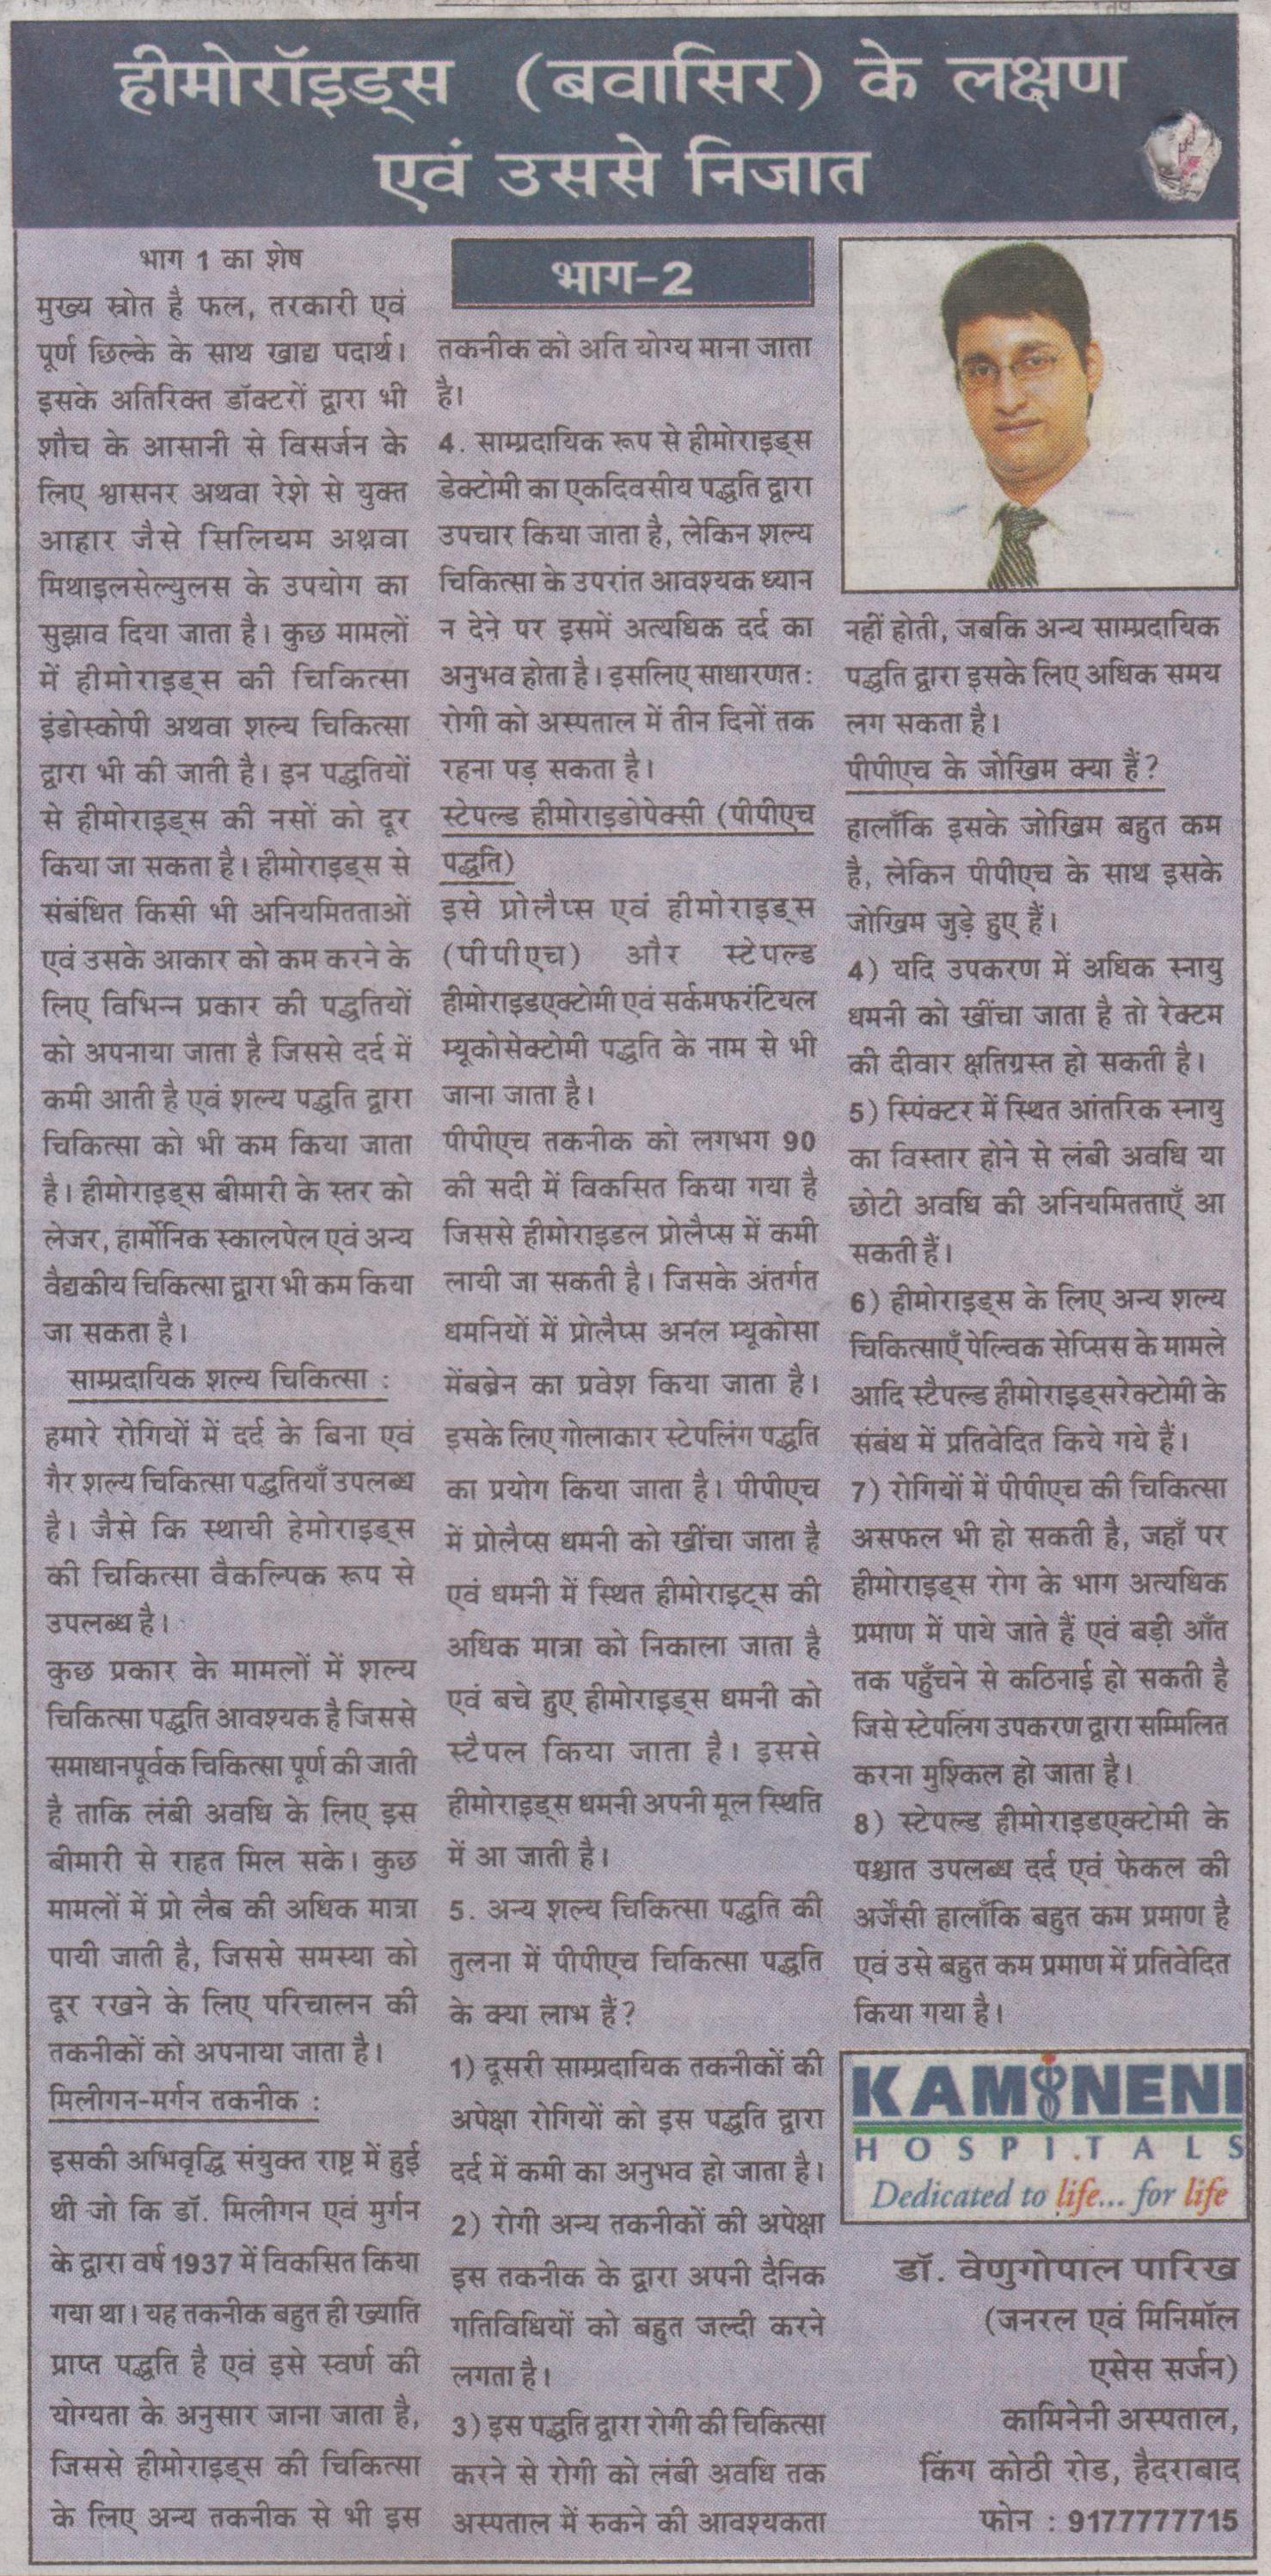 Hemorrhoid symptoms and treatment - Explained by Dr V Pareek in Hindi Newspaper